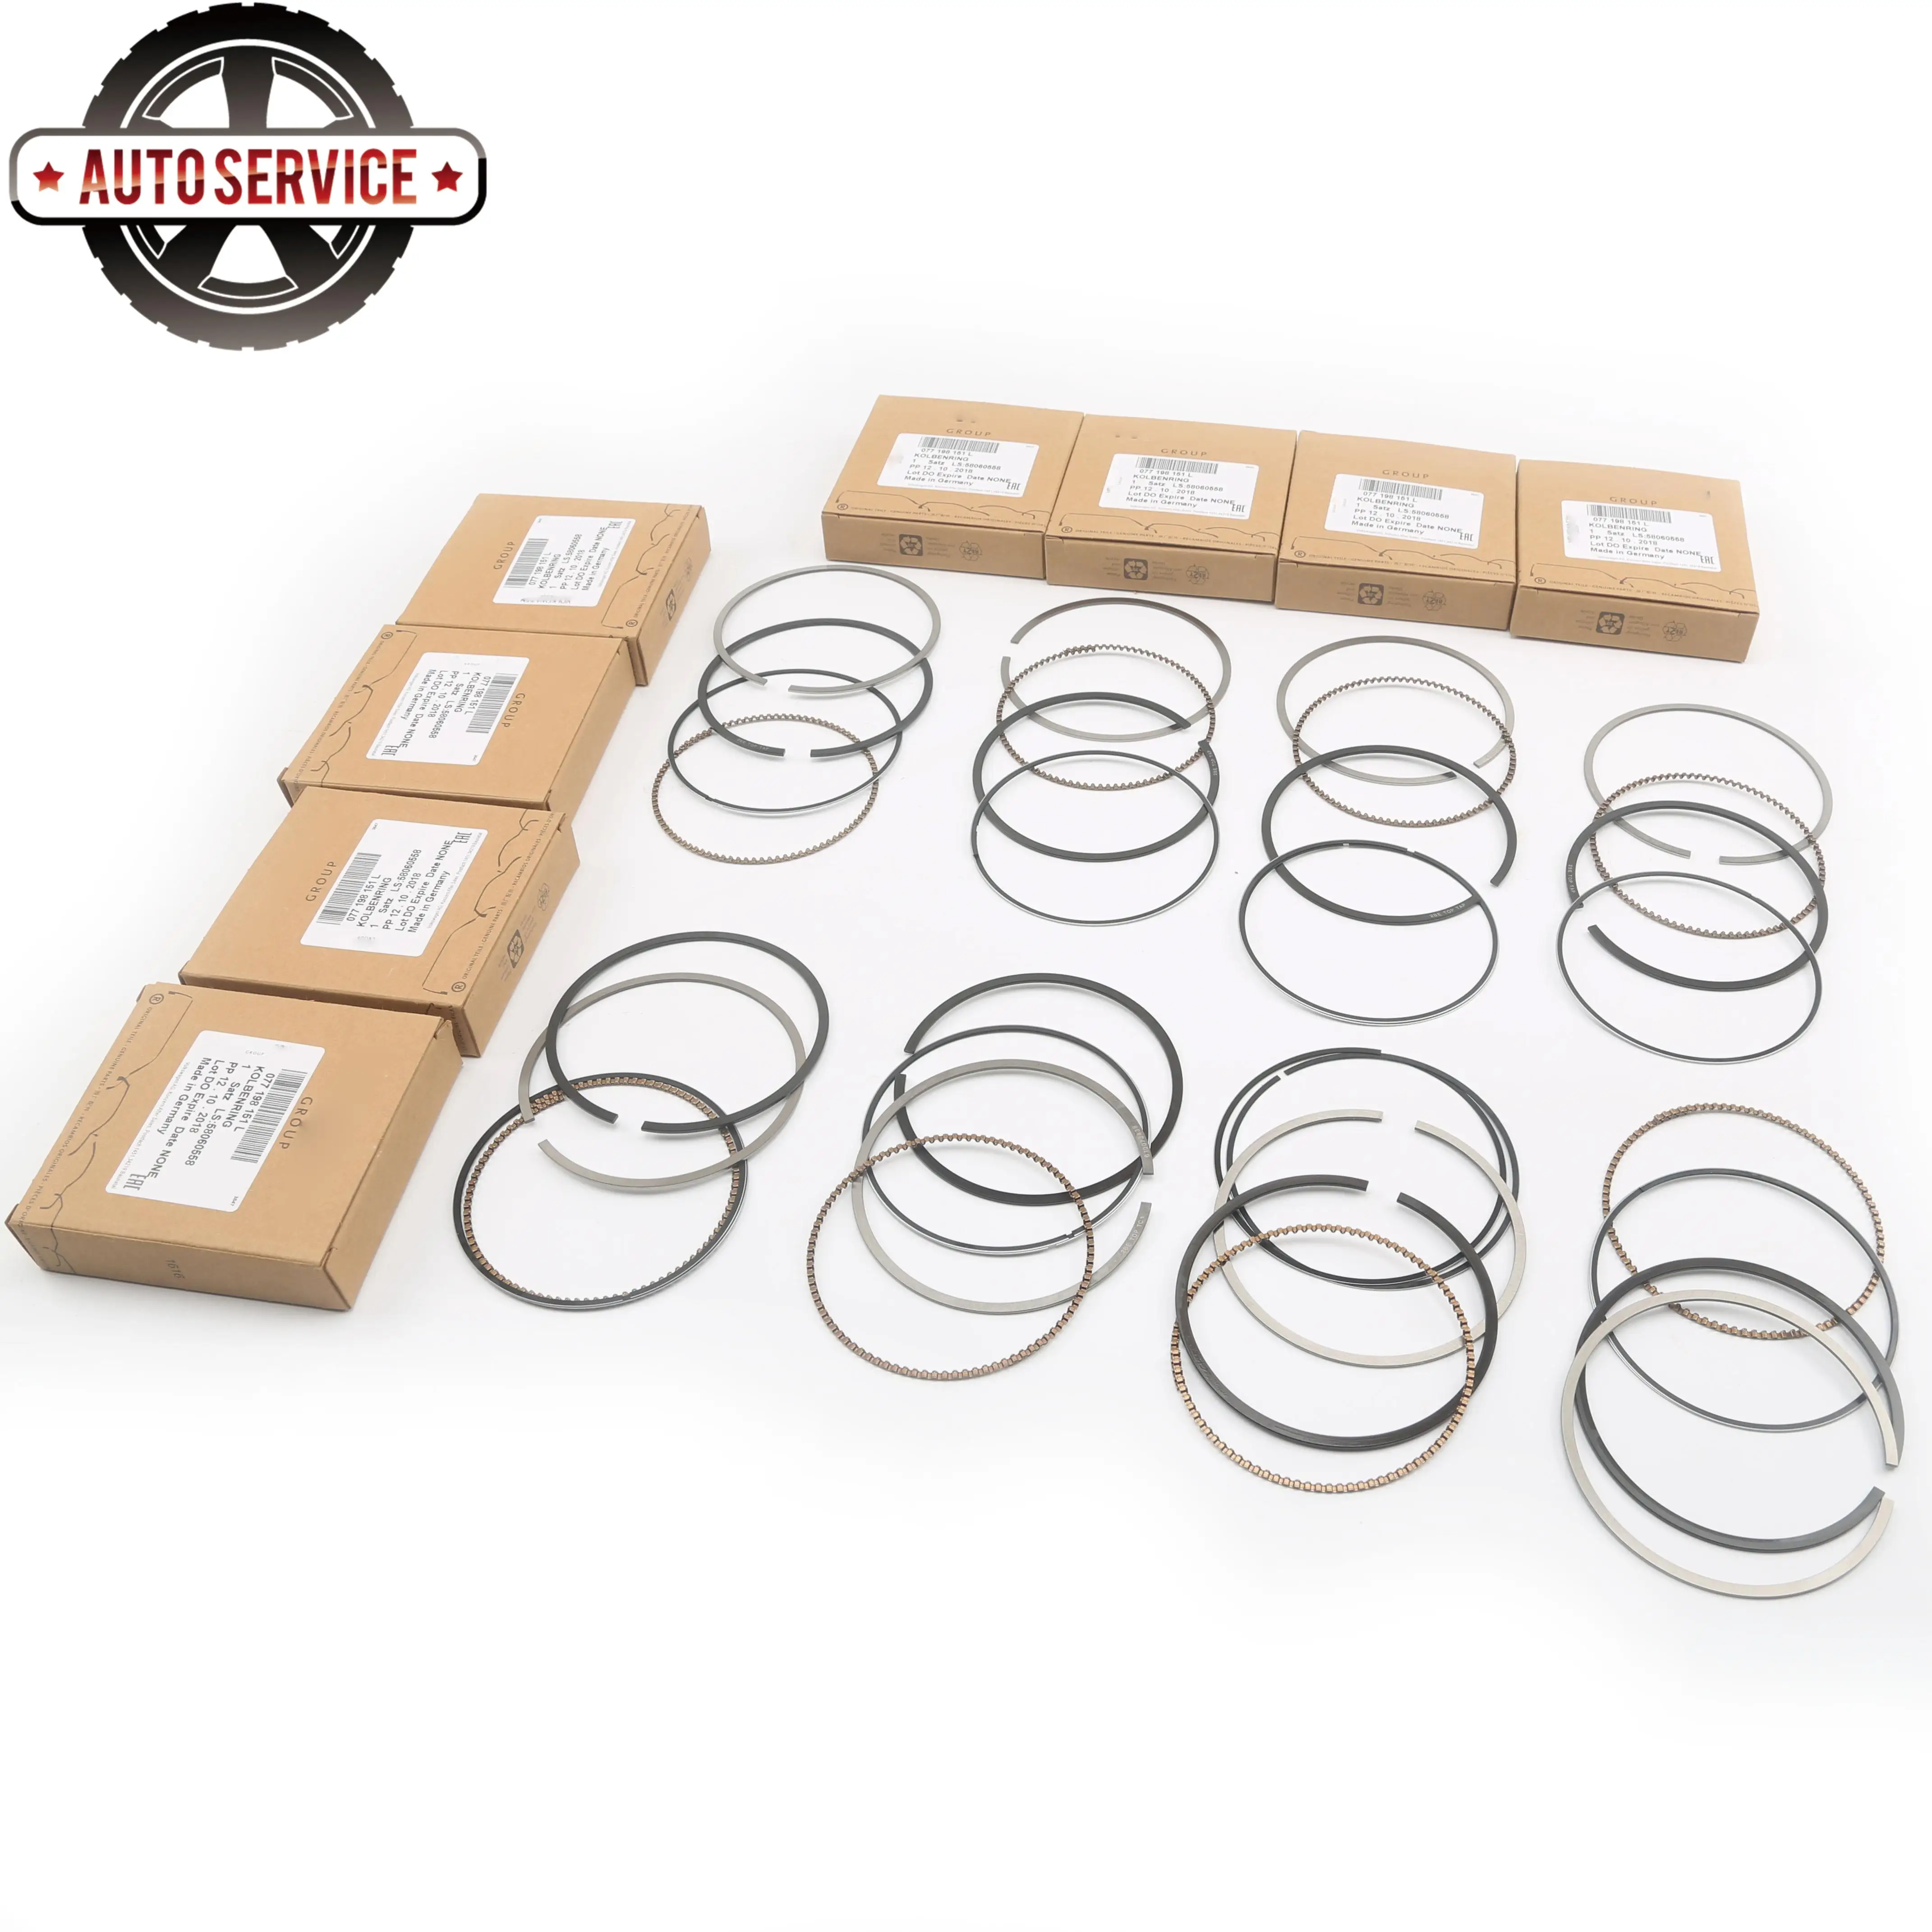 

Engine Parts Piston Rings Set 84.50mm 077 198 151 L For Audi S4 B6 B7 S5 A6 Quattor C6 A6 Allroad C6 A8 4H Q7 VW Touareg 7L 7P